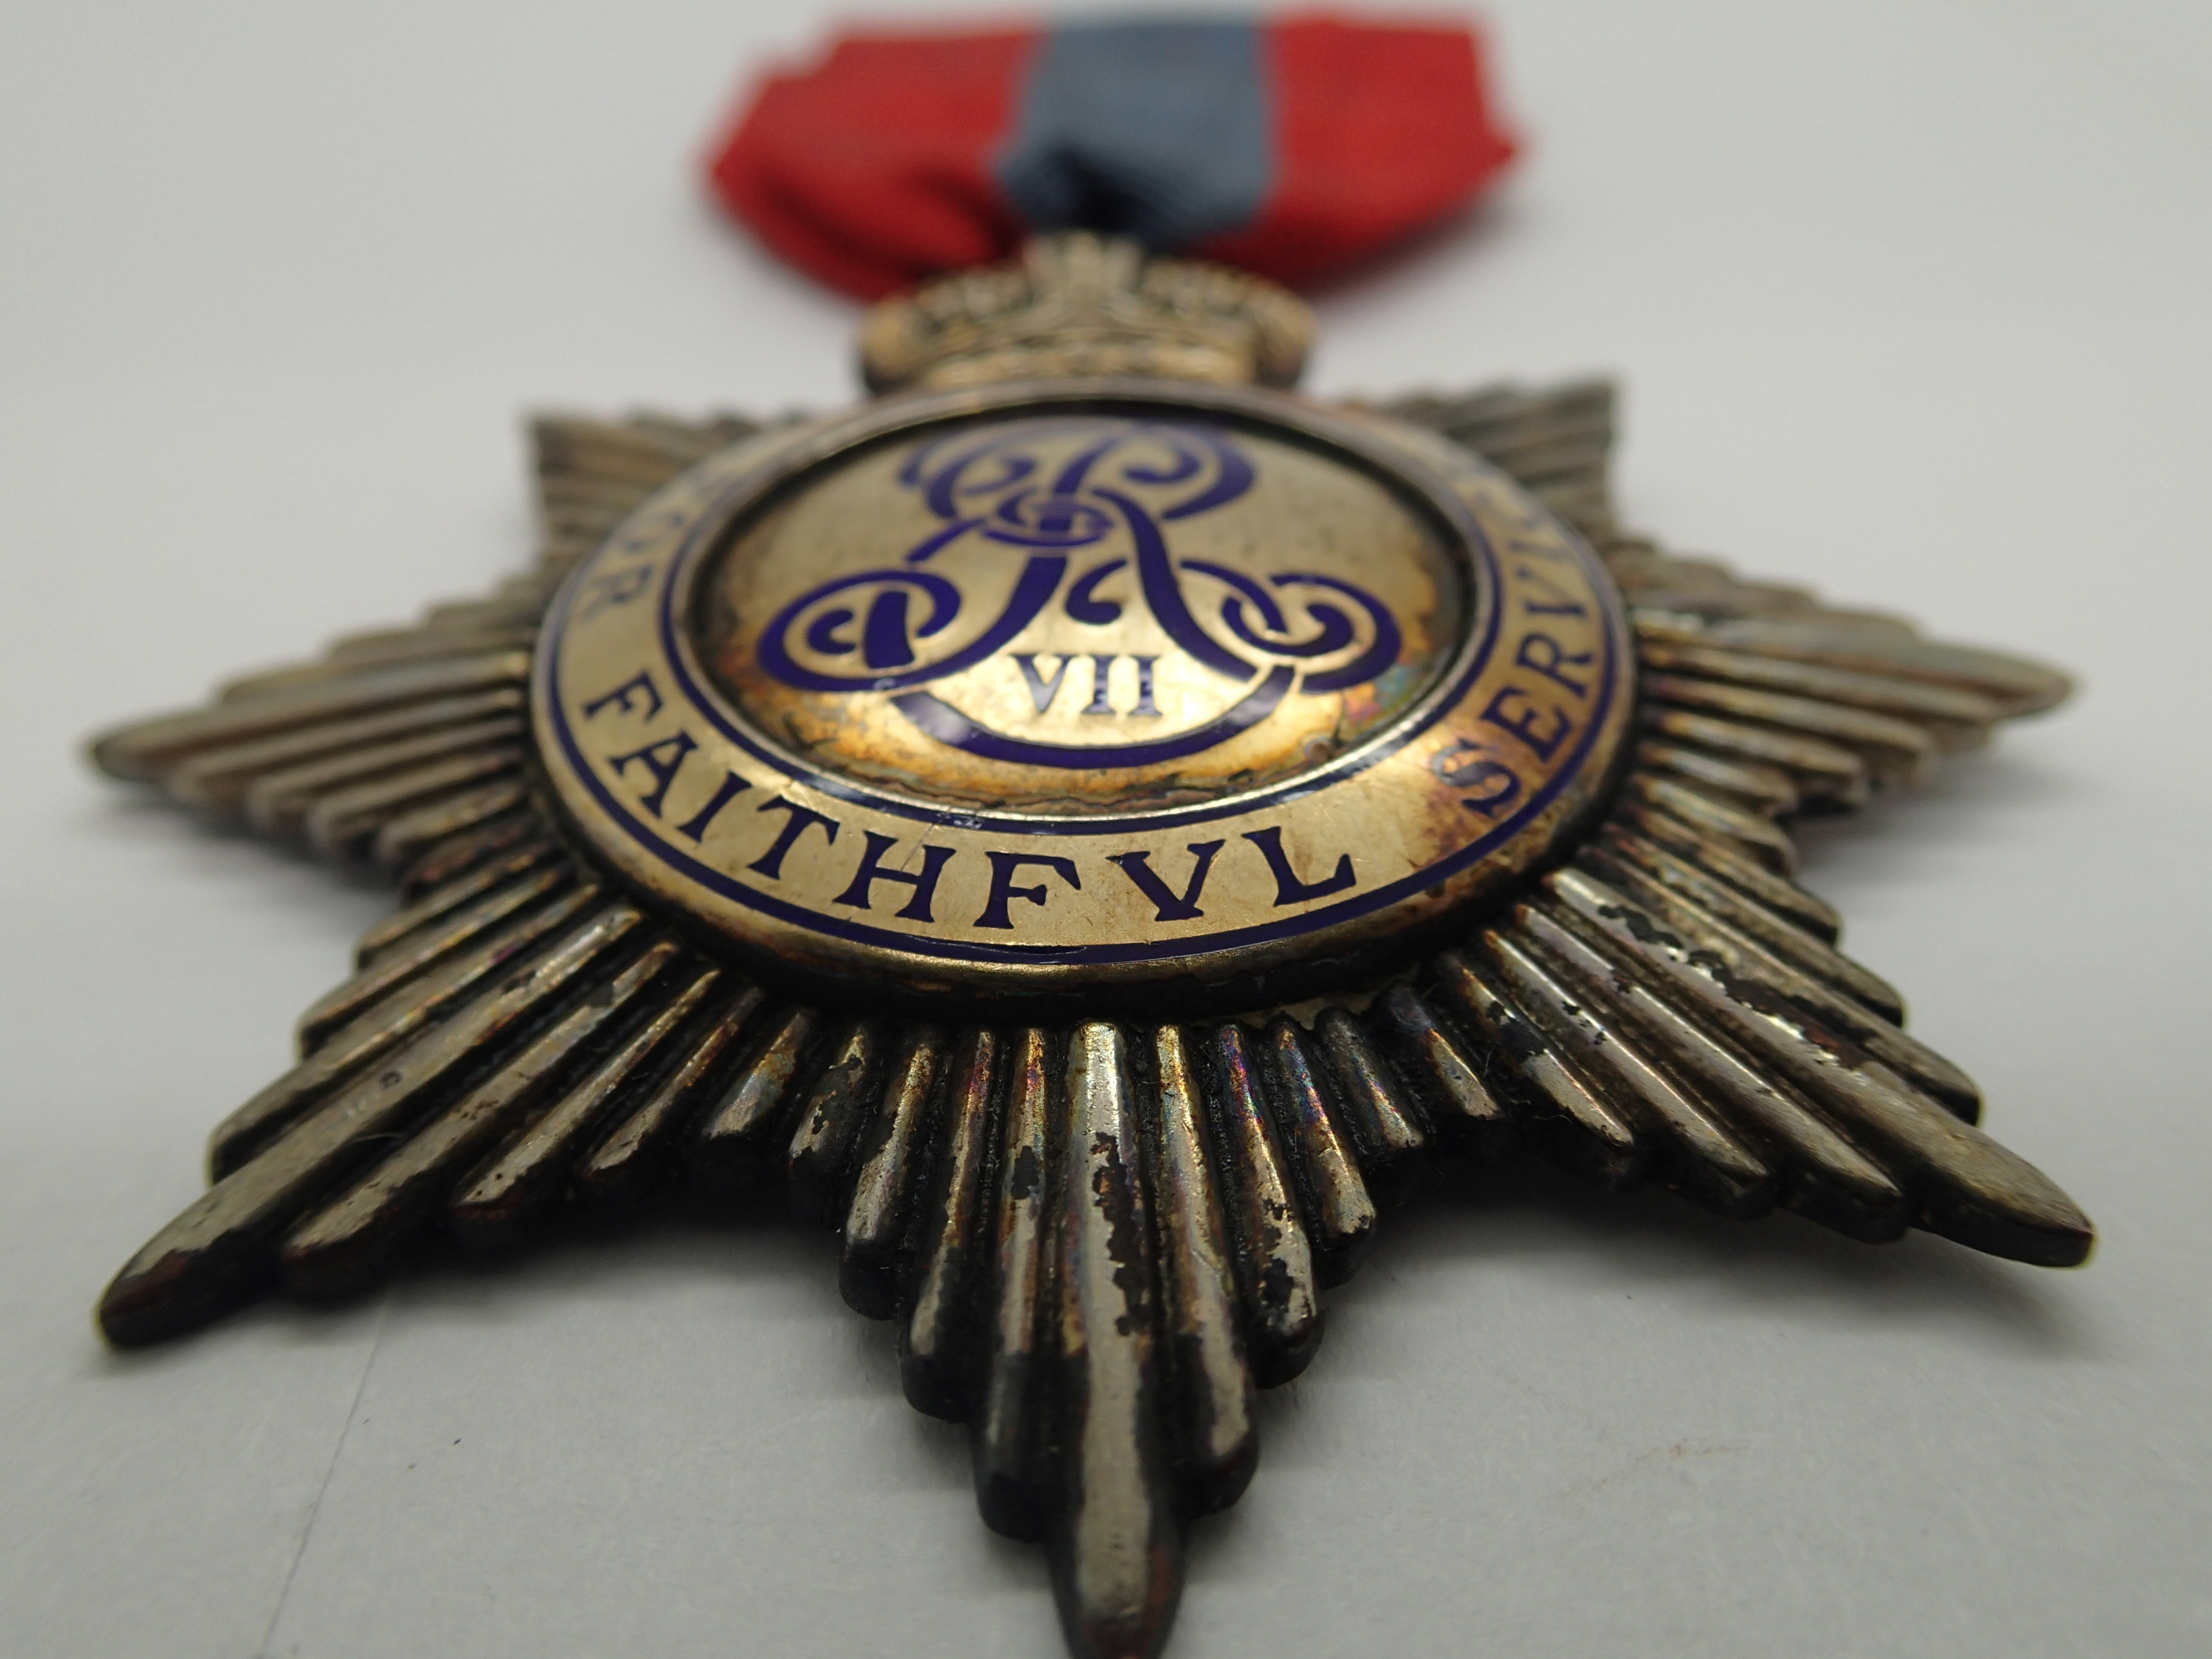 Edward VII Imperial Service Order. P&P Group 1 (£14+VAT for the first lot and £1+VAT for - Image 2 of 5